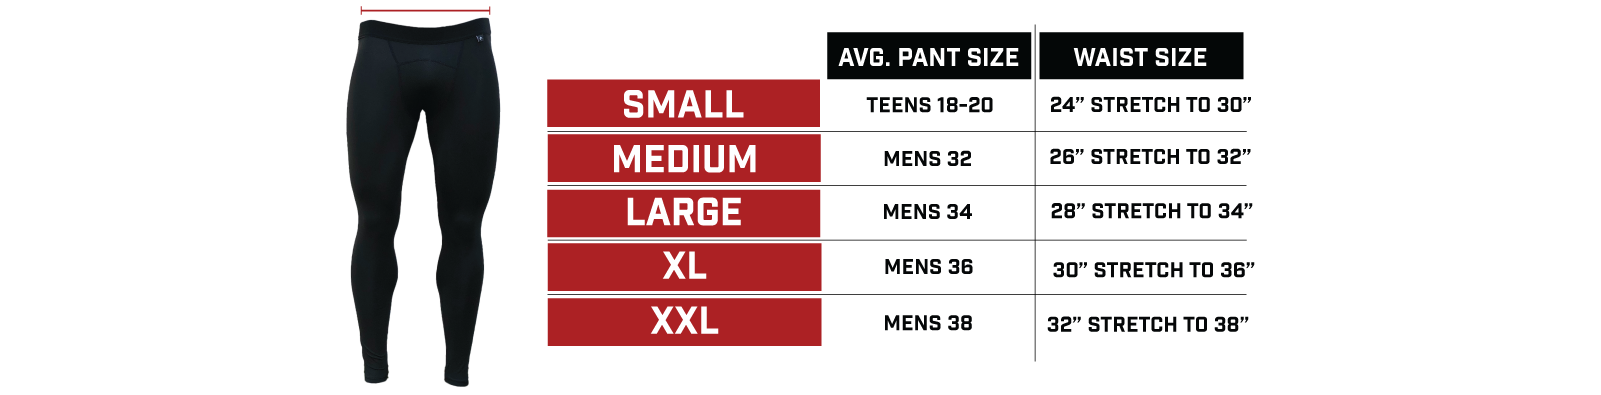 Compression Tights Sizing Guide